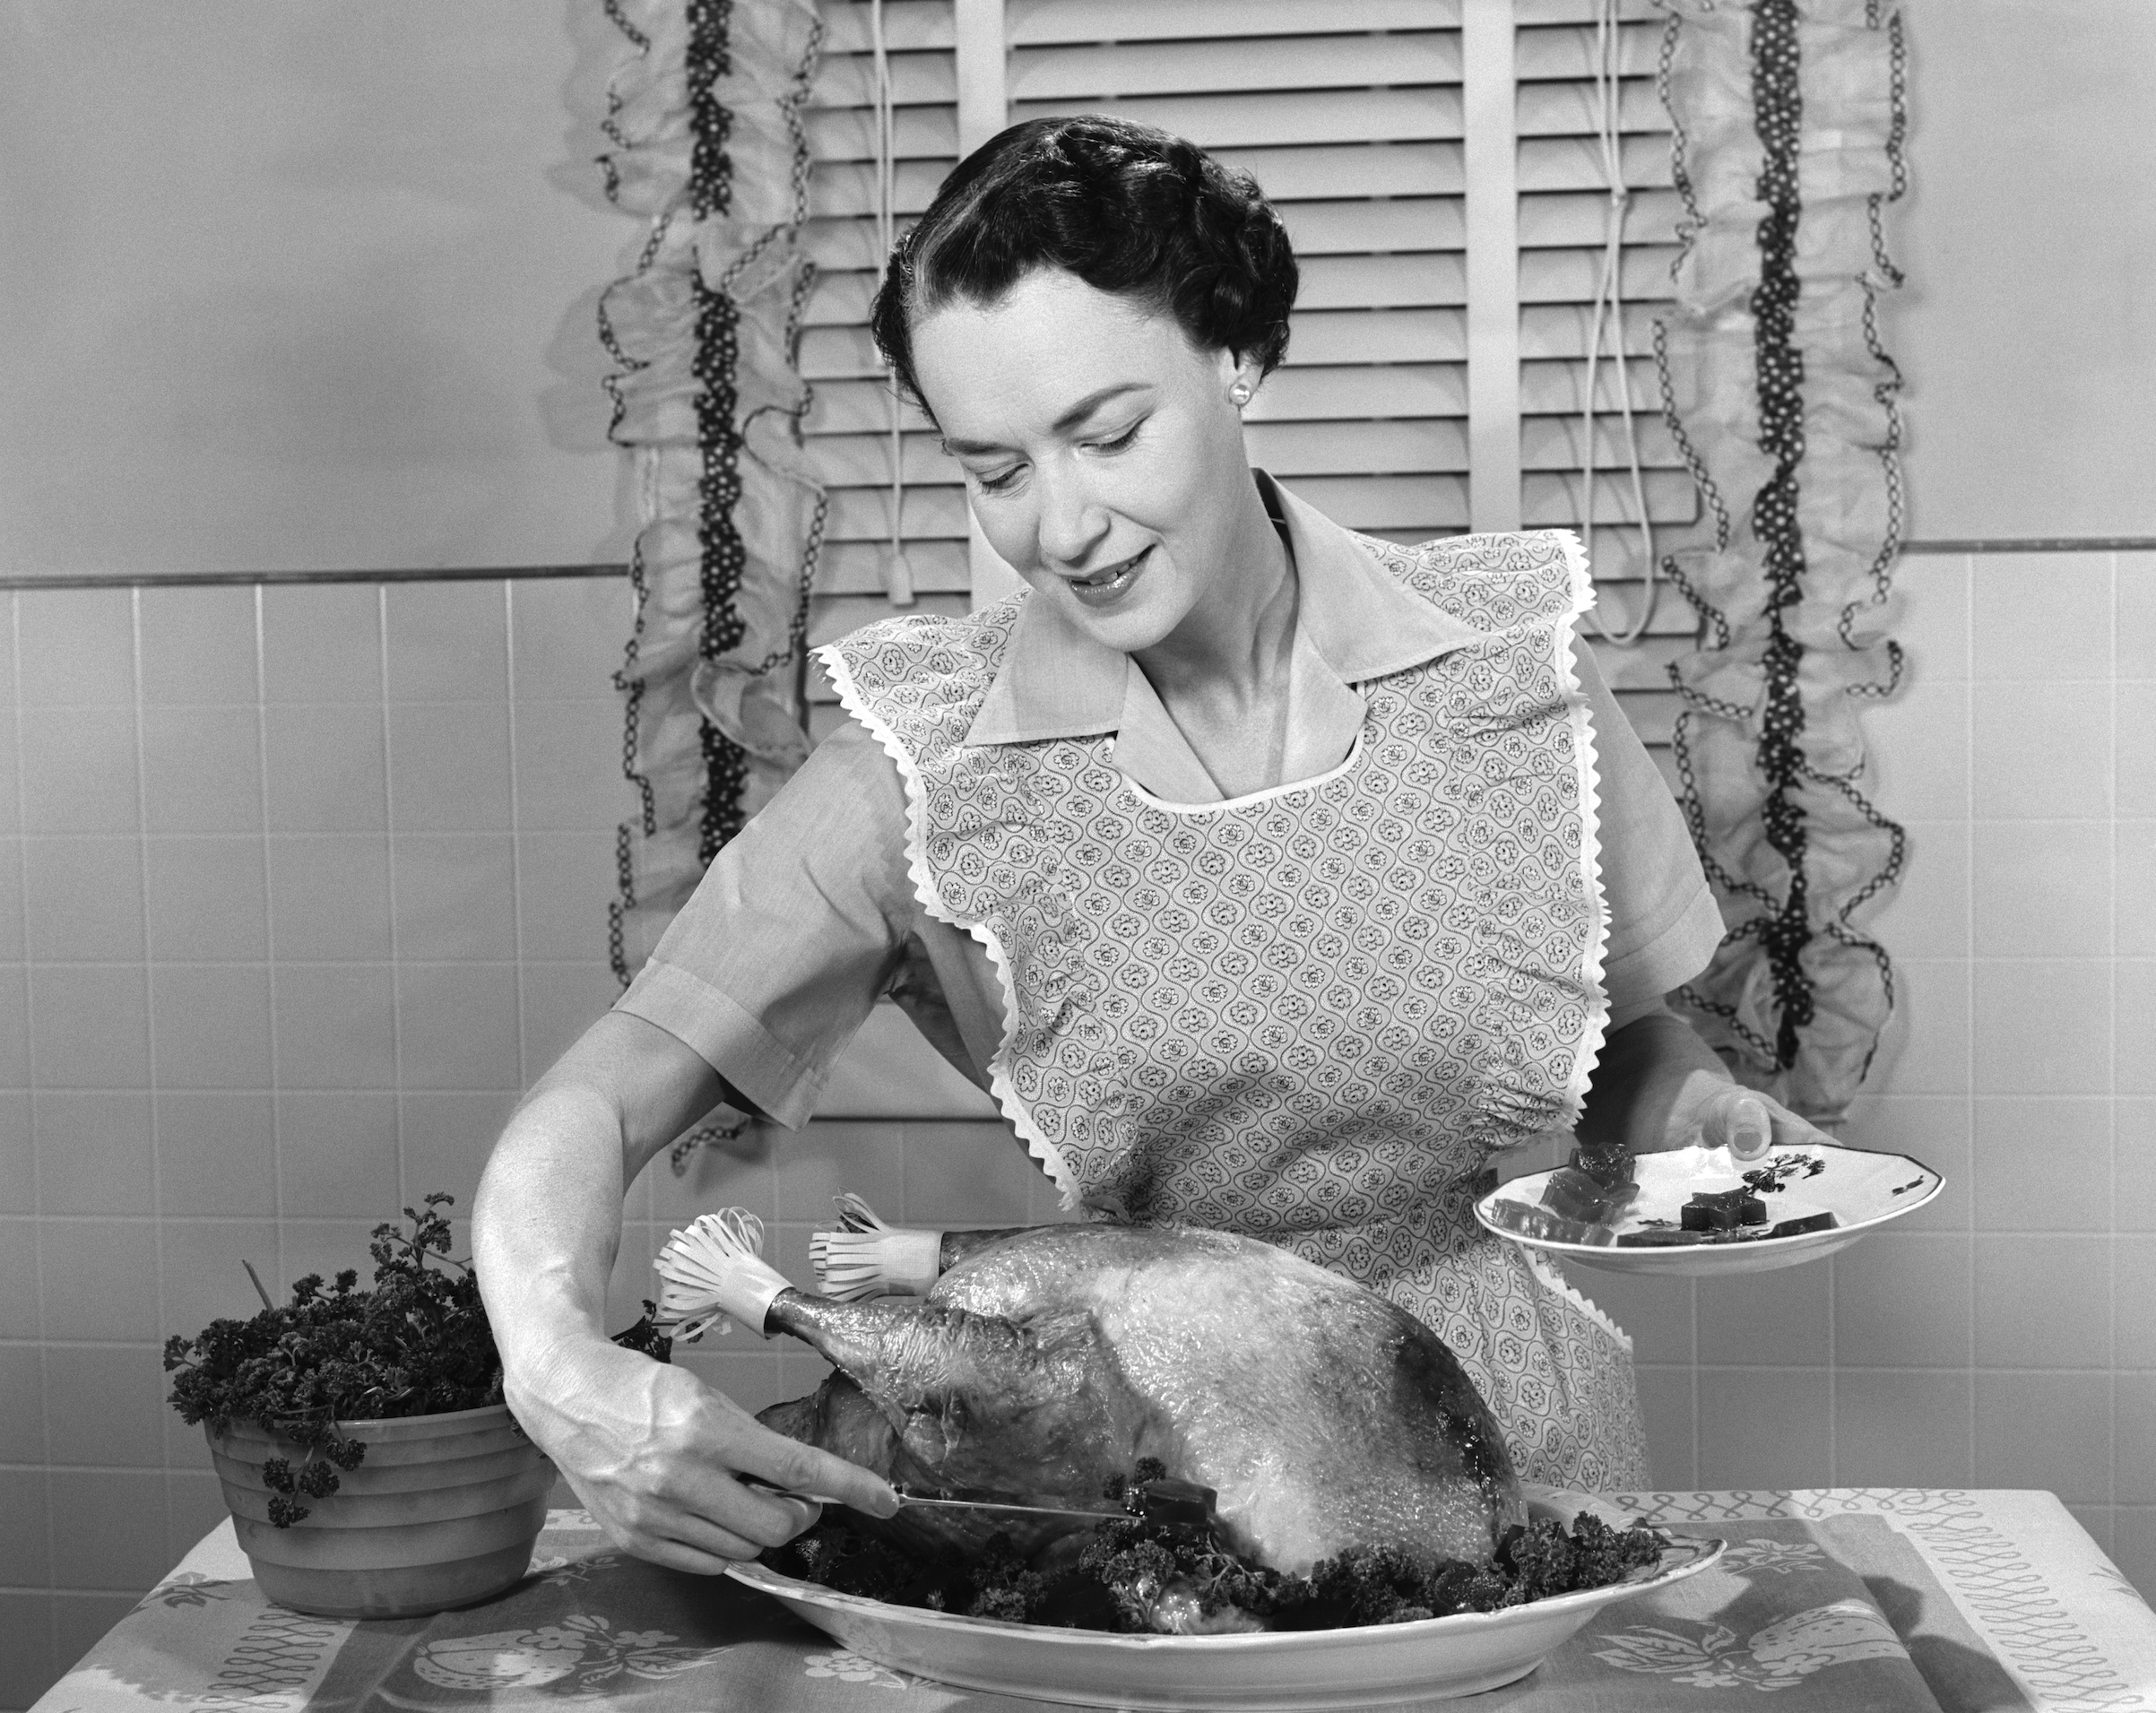 A woman dished cranberry sauce around a turkey in the 1950s (H. Armstrong Roberts/ClassicStock/Getty Images)